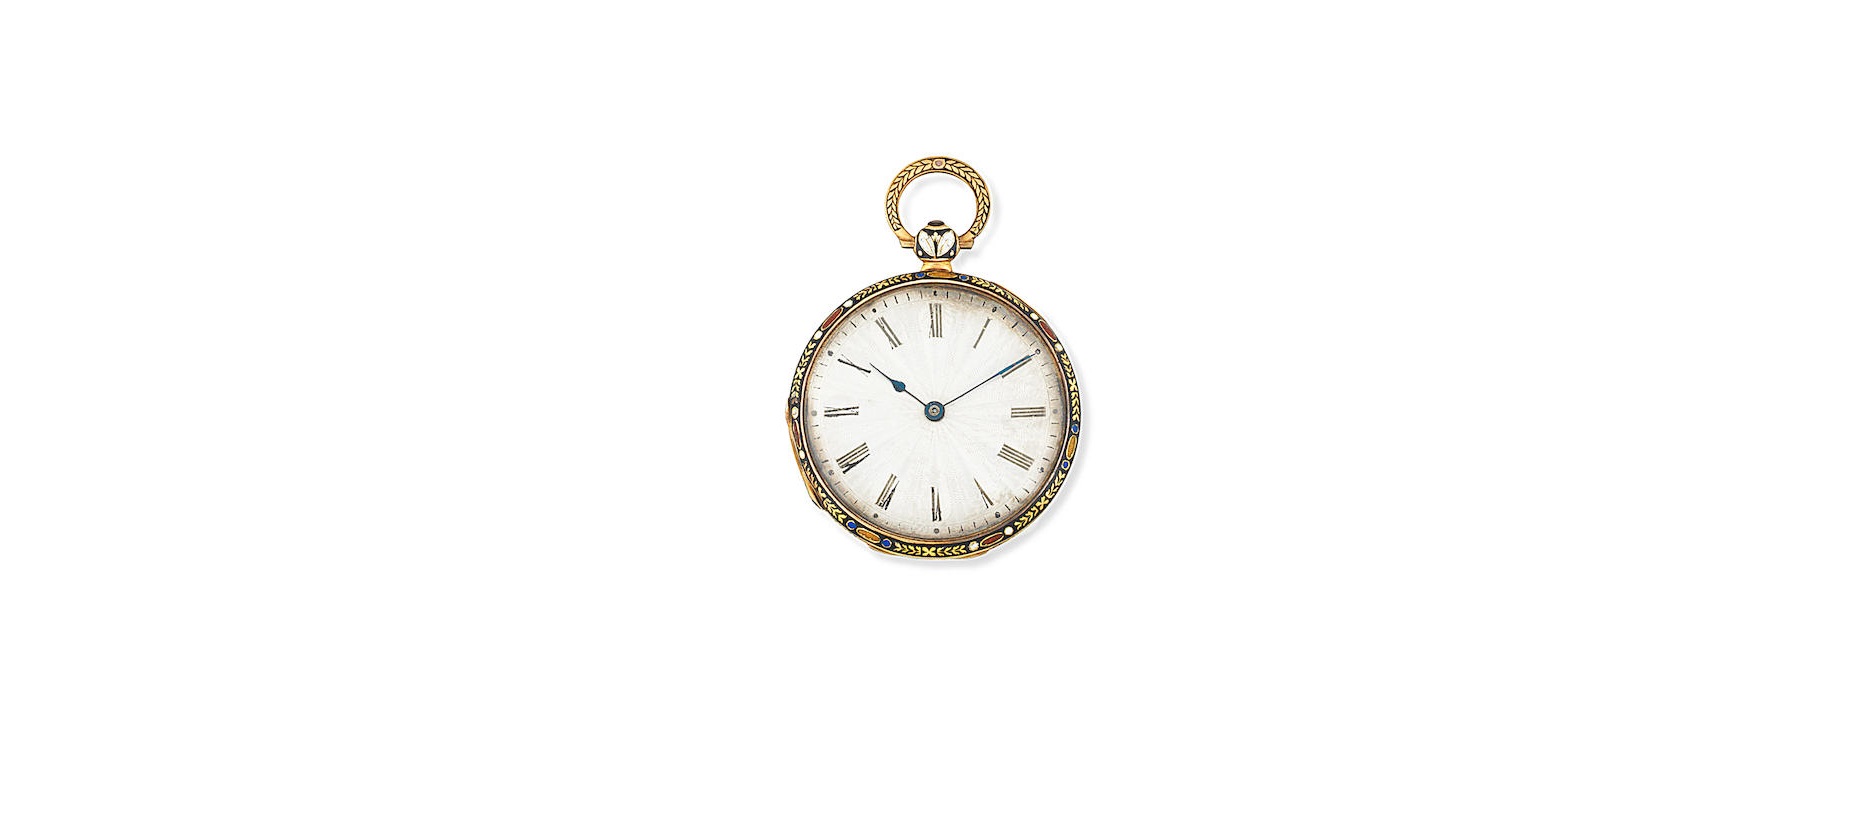 A gold and enamel decorated key wind open face pocket watch - Image 2 of 2